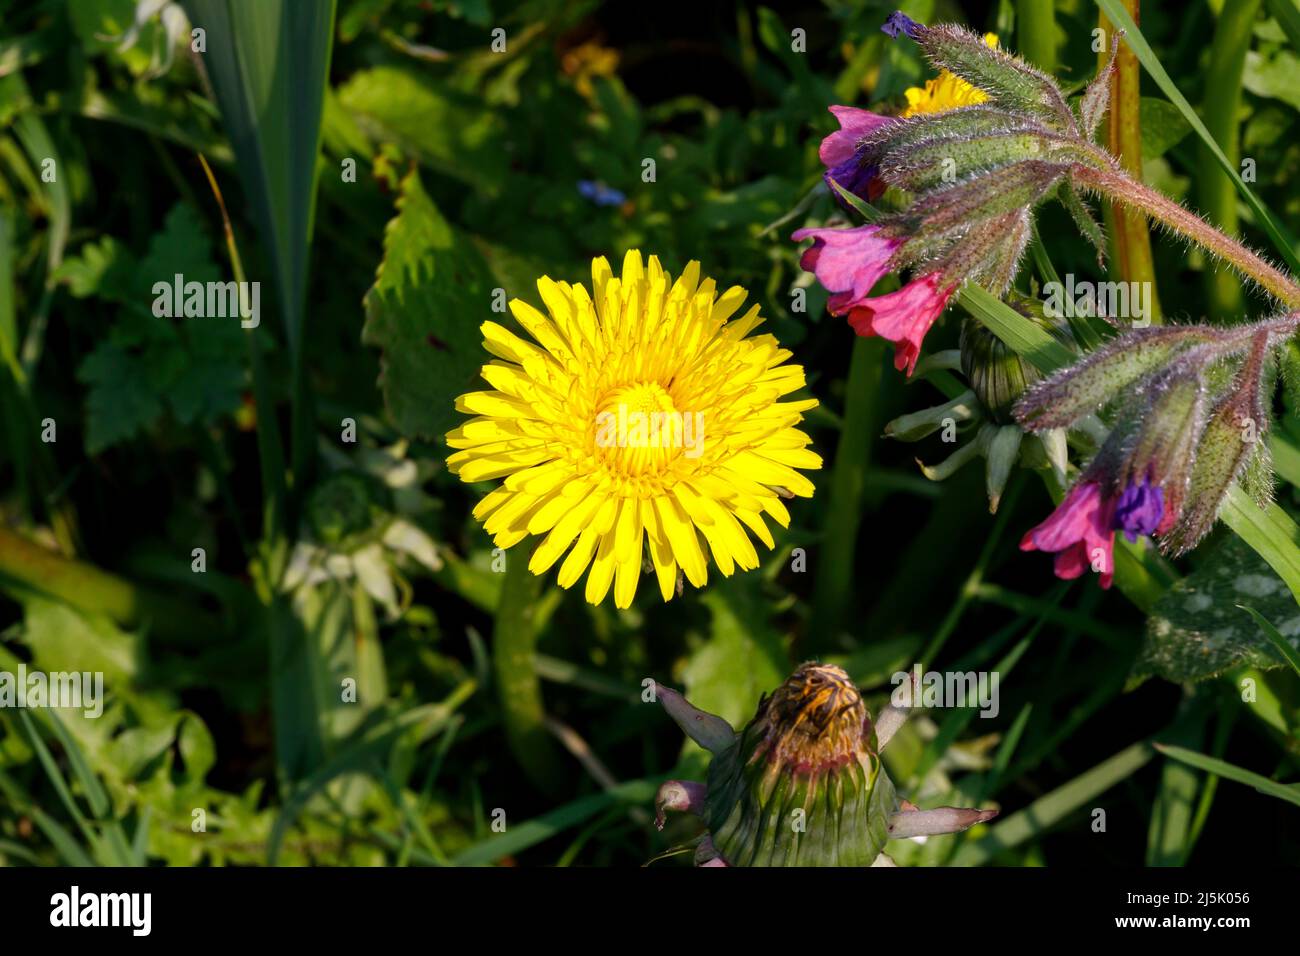 Common dandelion (Taraxacum officinale) commonly seen as a garden weed, Sussex, UK Stock Photo